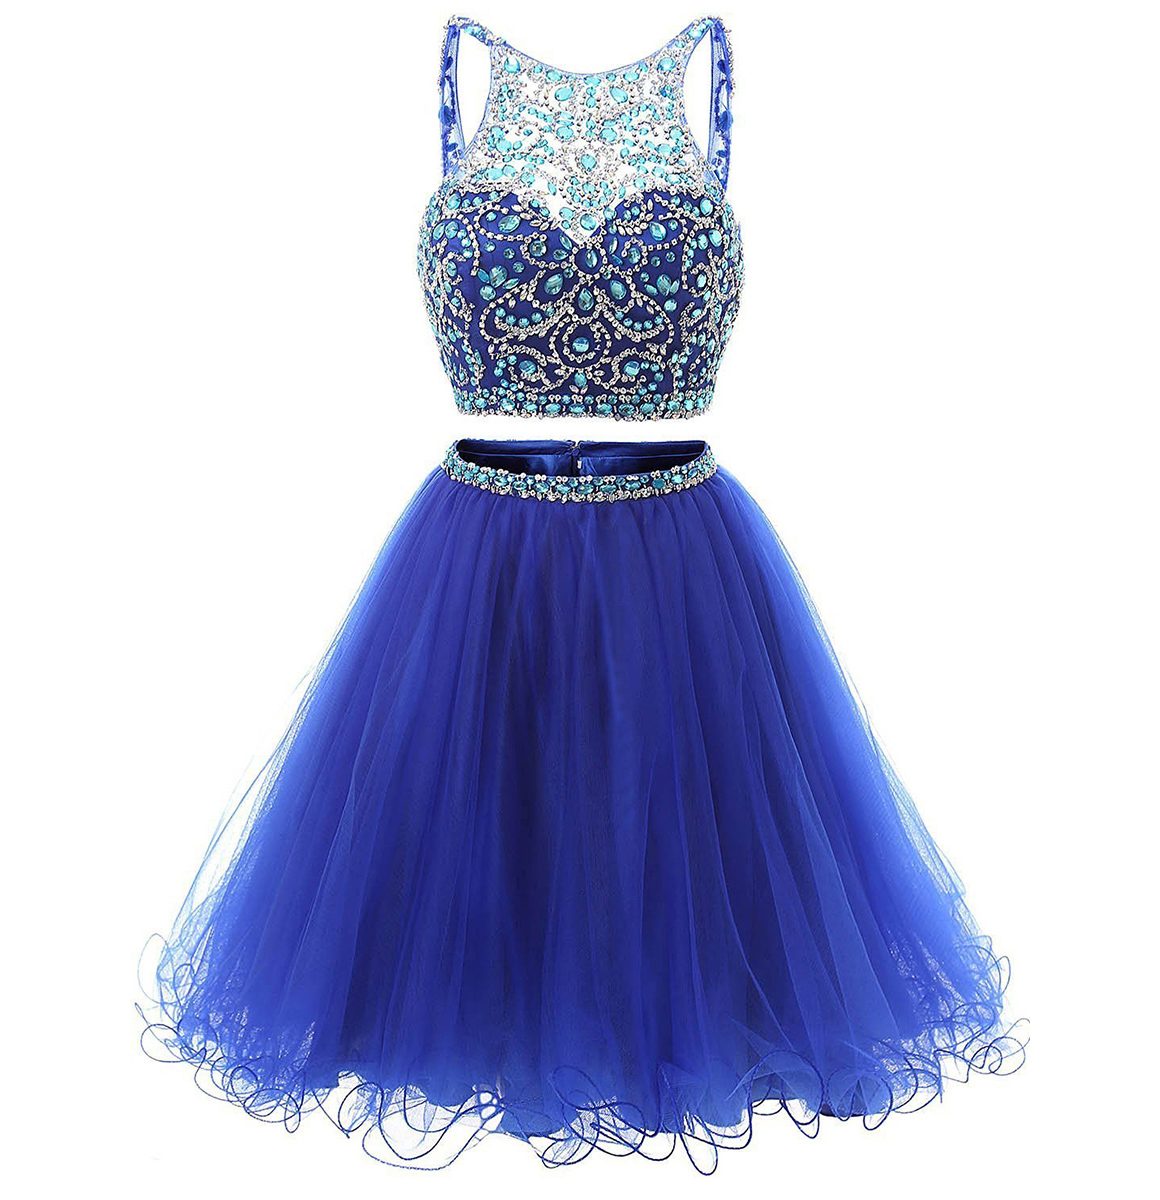 Illusion Sequins Crystal Homecoming Dress,shining Two Piece Low Back Short Prom Dress,royal Blue Mini Tulle Homecoming Dress,h093